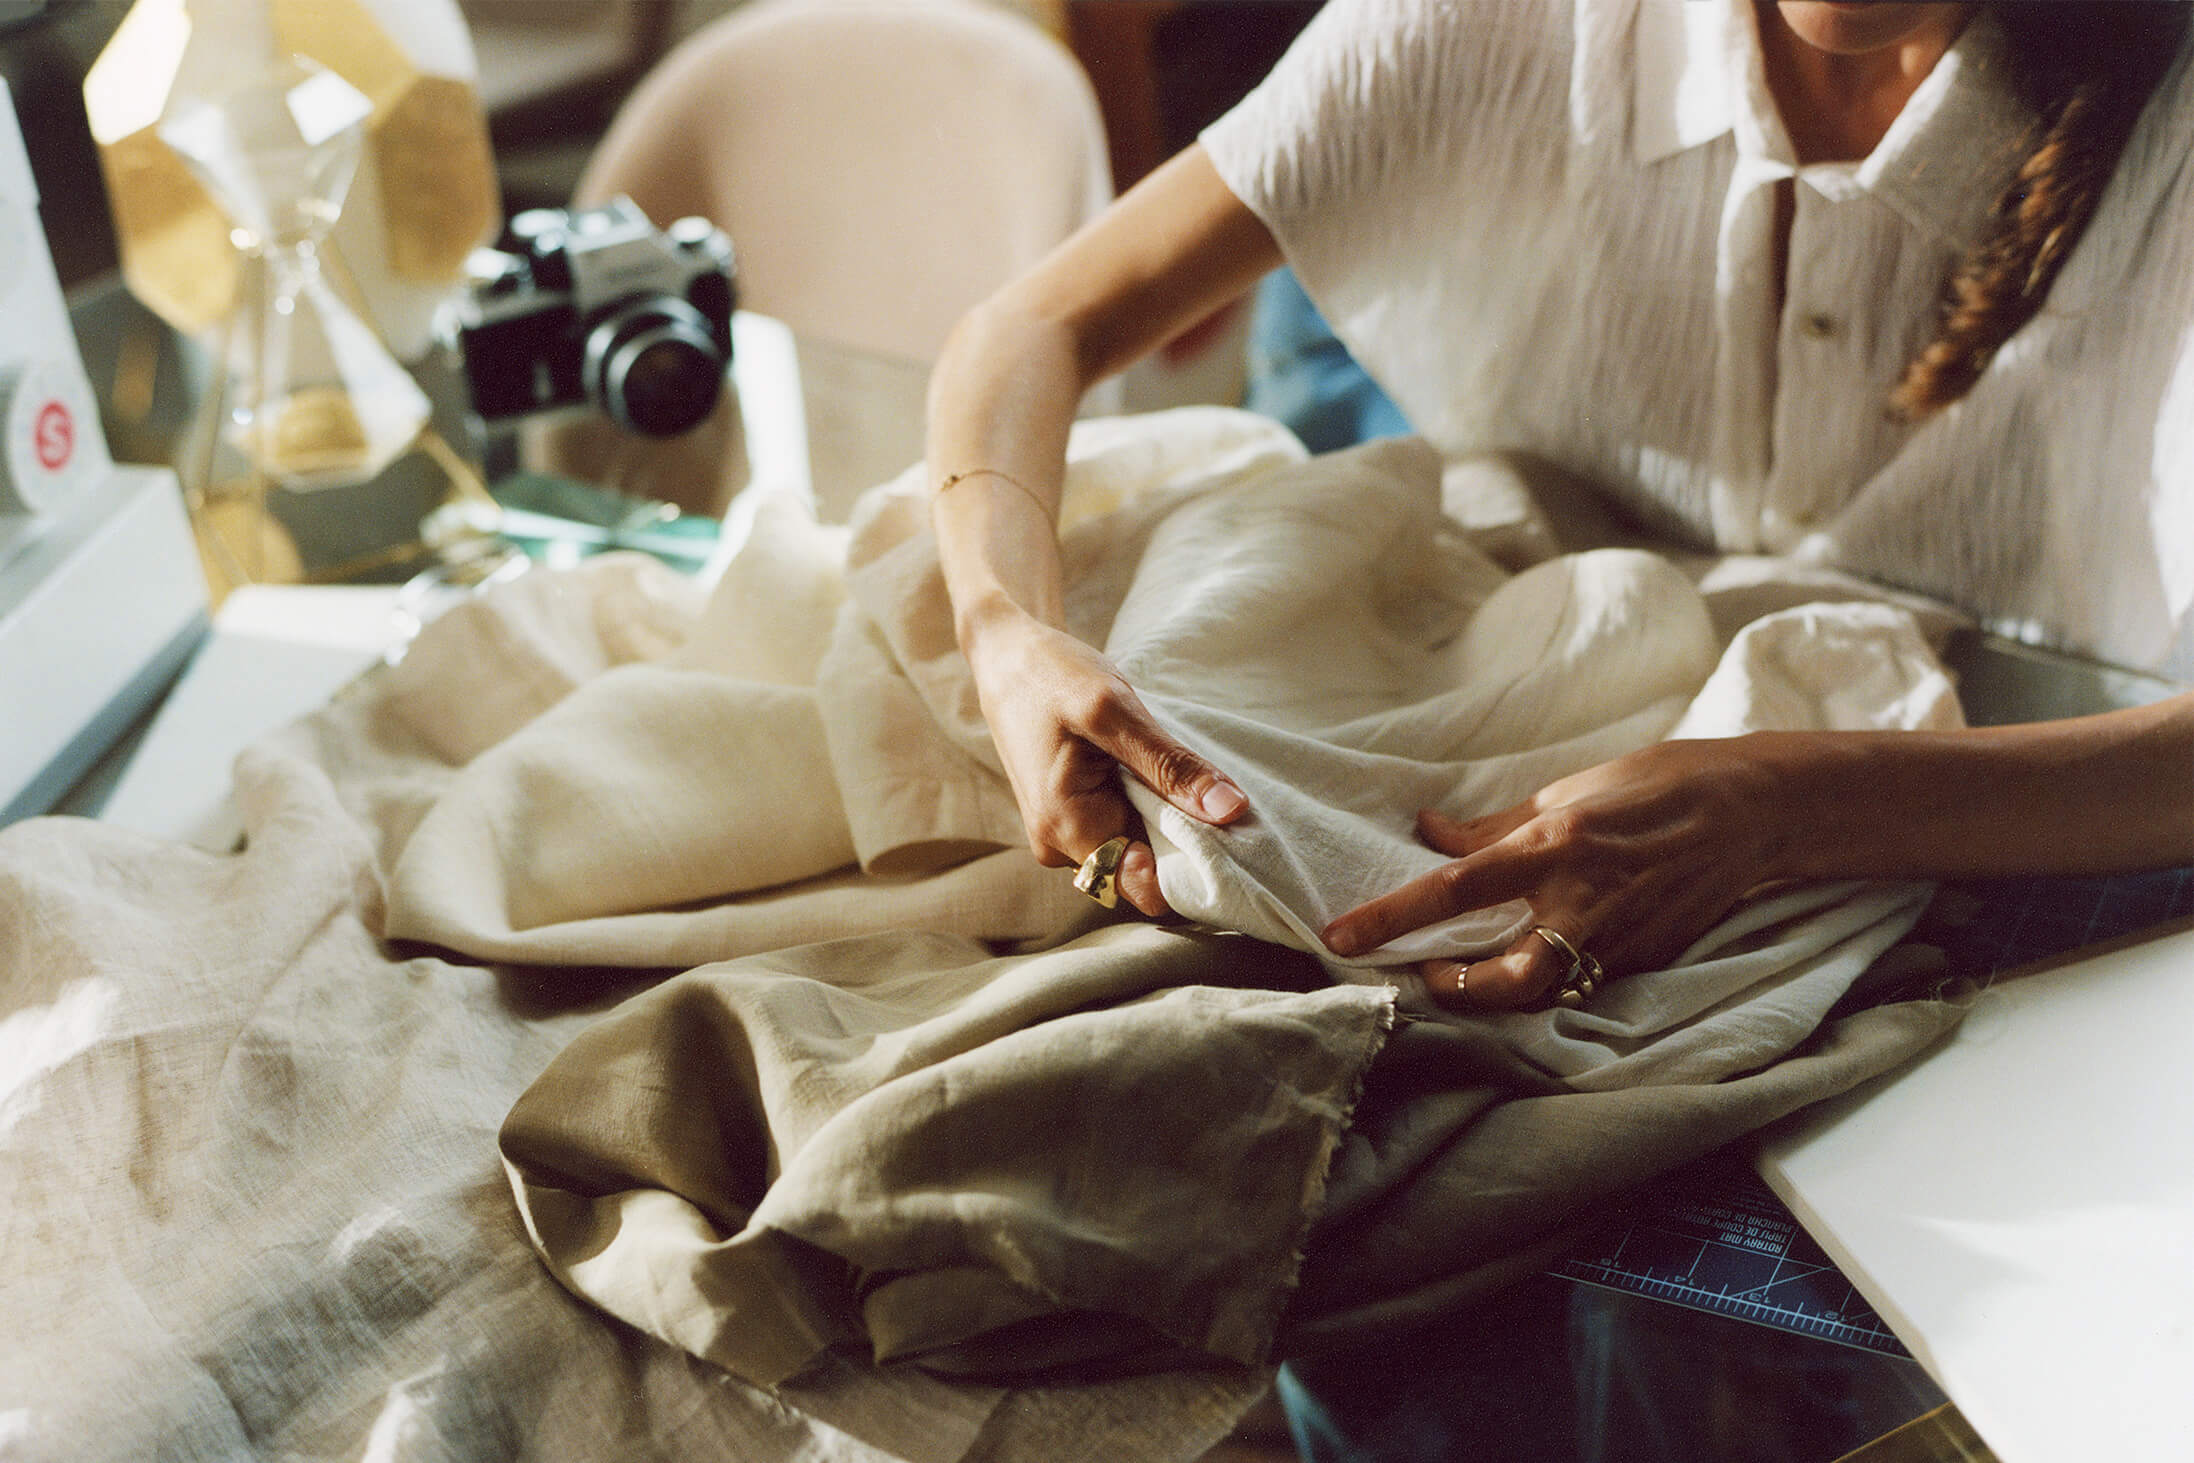 Image of Mara Hoffman designer modifying one of the pieces in the Winter Sun capsule collection.